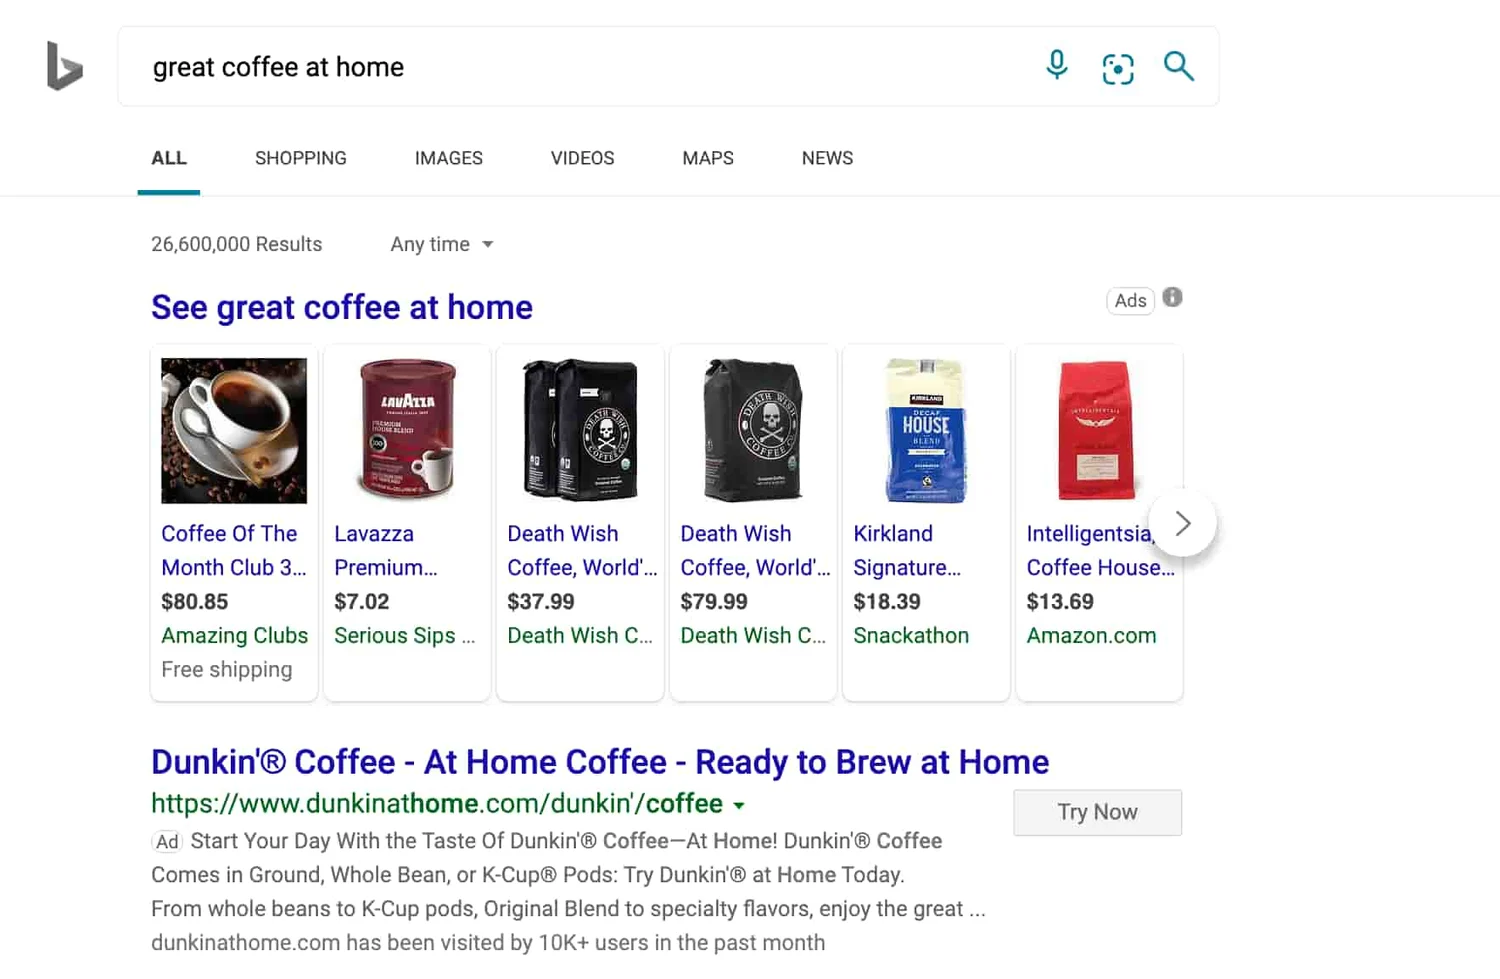 great coffee at home bing ppc ad example